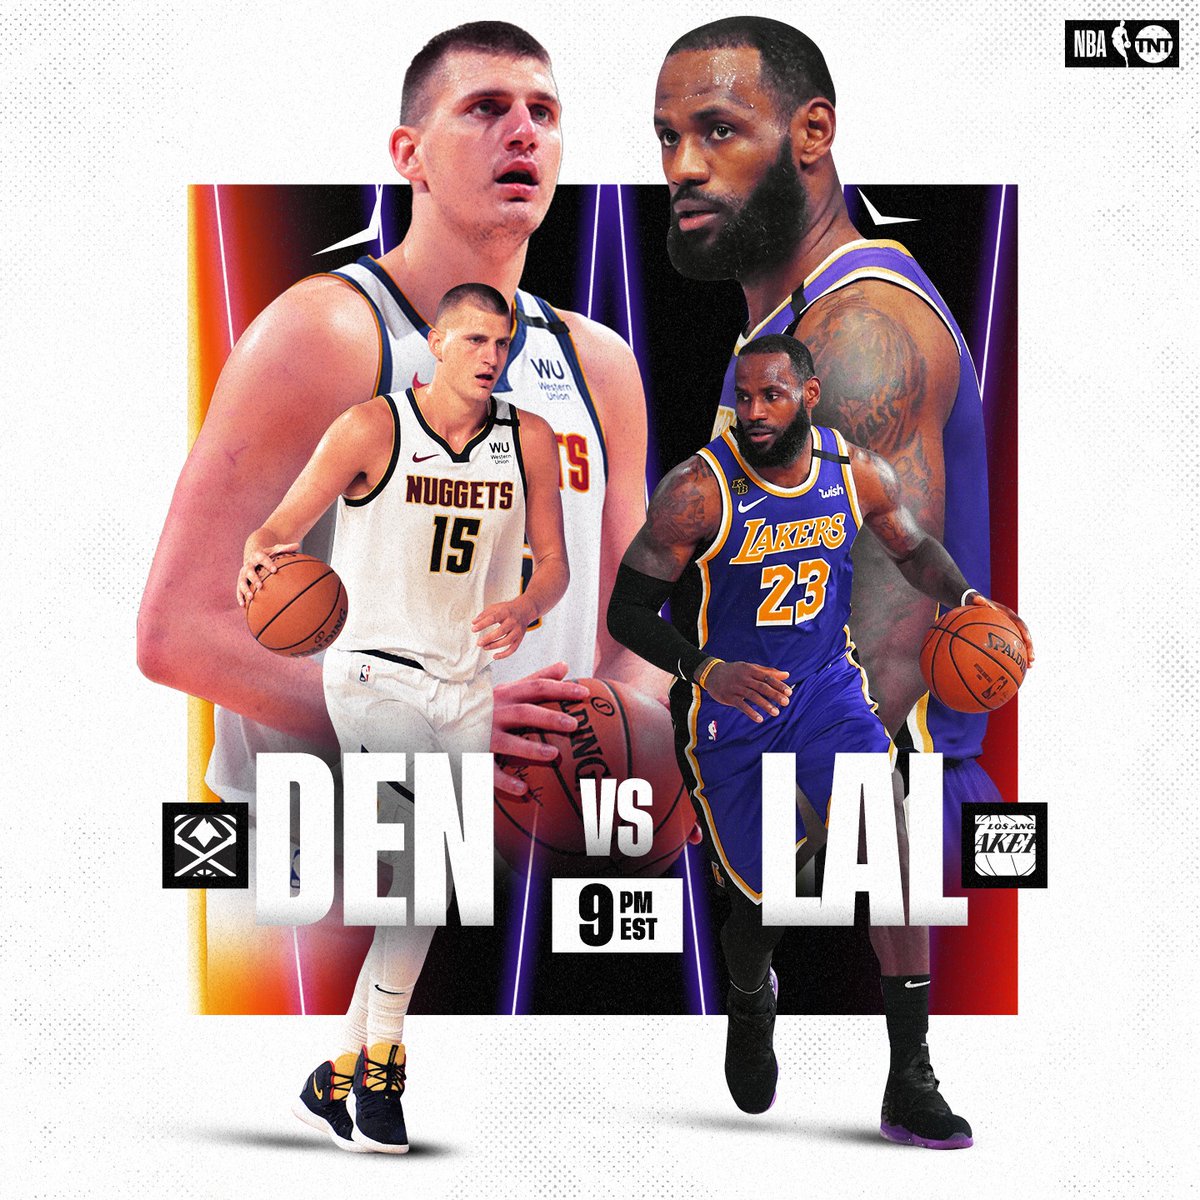 Nba On Tnt On Twitter We Ve Got A Big Western Conference Matchup Tonight On Tnt Nuggets Vs Lakers 9pm Et